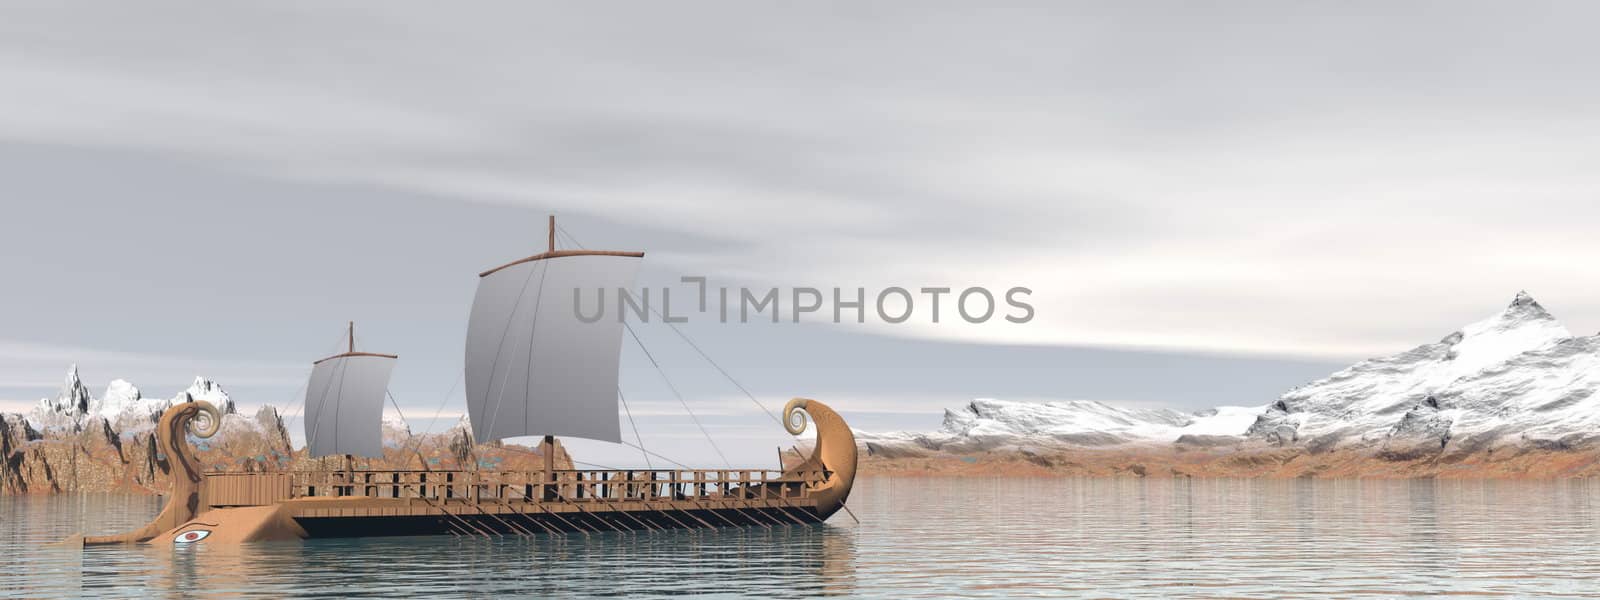 Old greek trireme boat on the ocean next to snowy mountains by cloudy weather